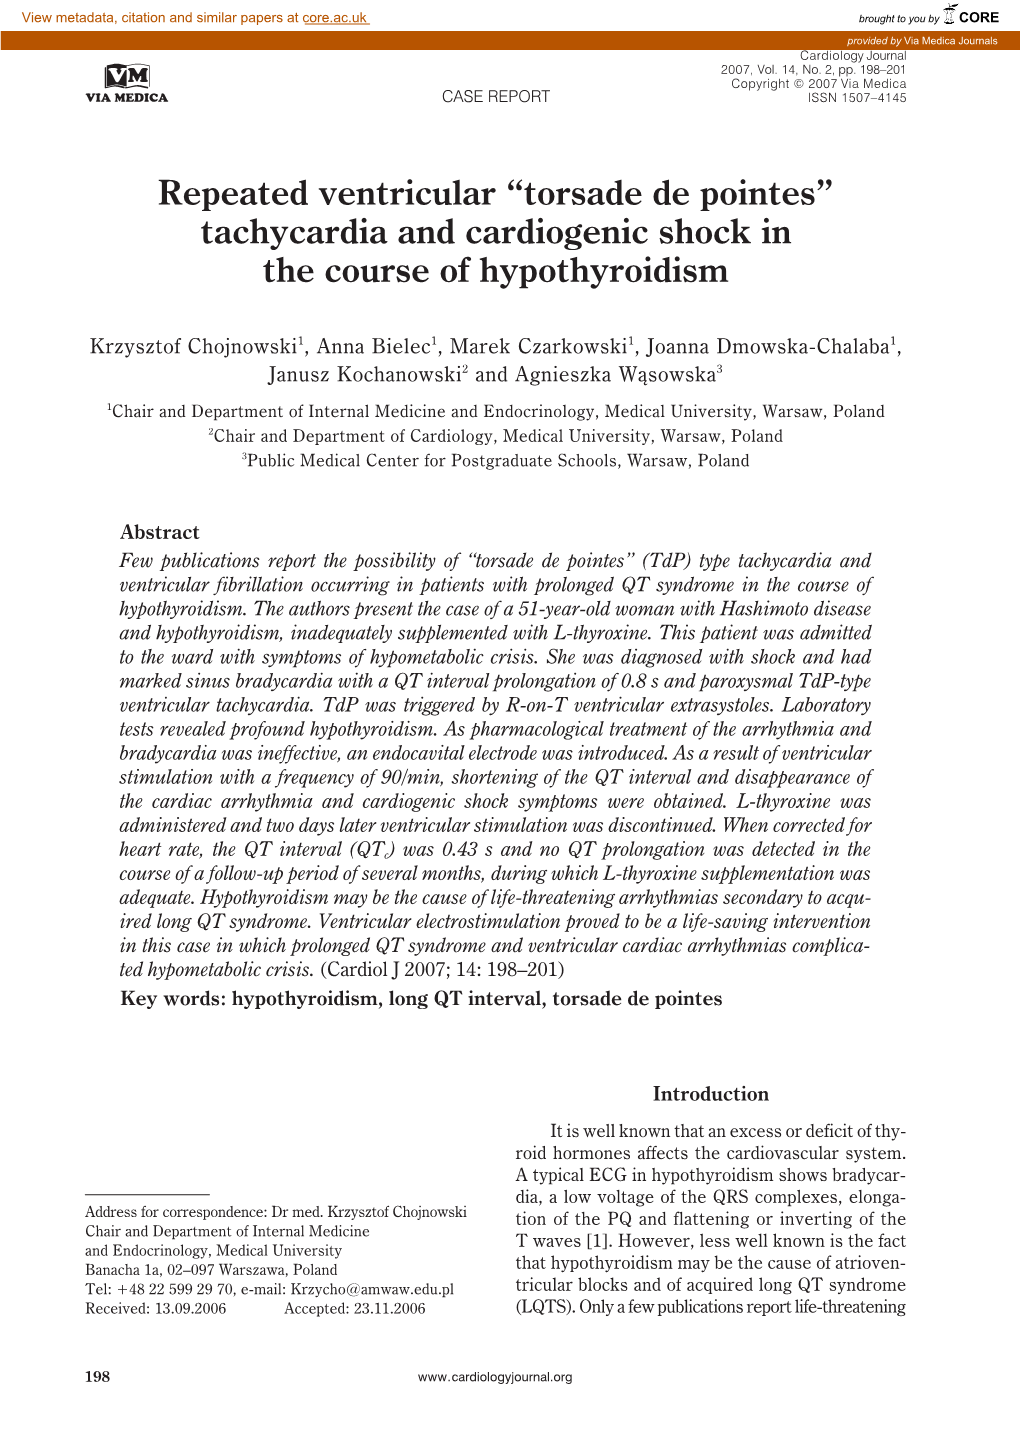 “Torsade De Pointes” Tachycardia and Cardiogenic Shock in the Course of Hypothyroidism